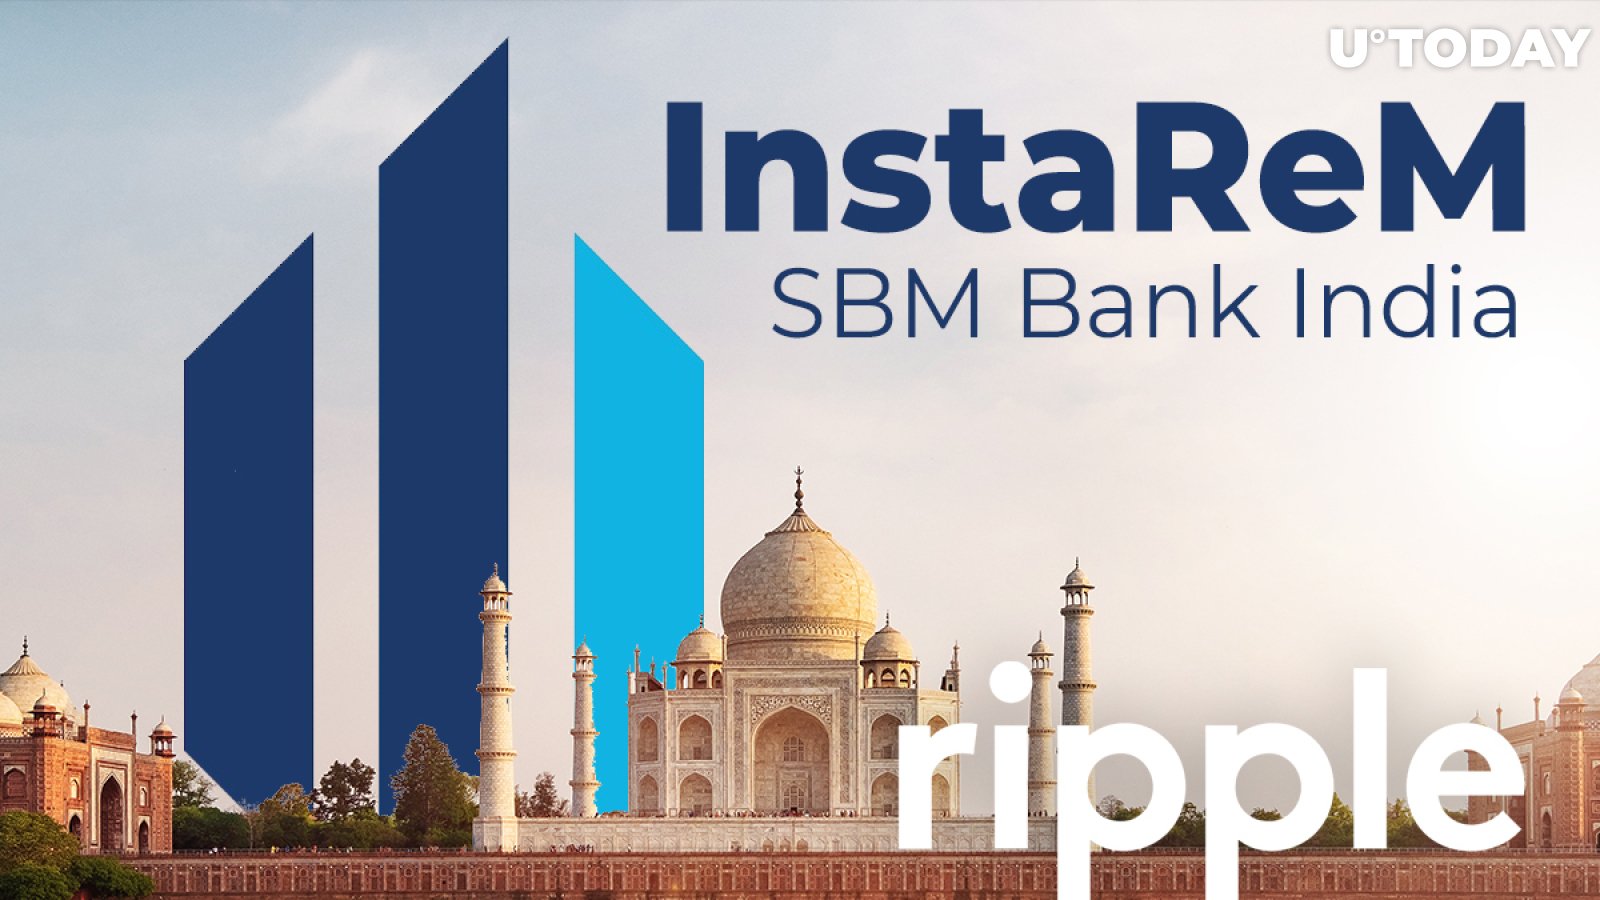 XRP Dances Near $0.30 While Ripple’s Partner InstaReM Joins Forces with SBM Bank India